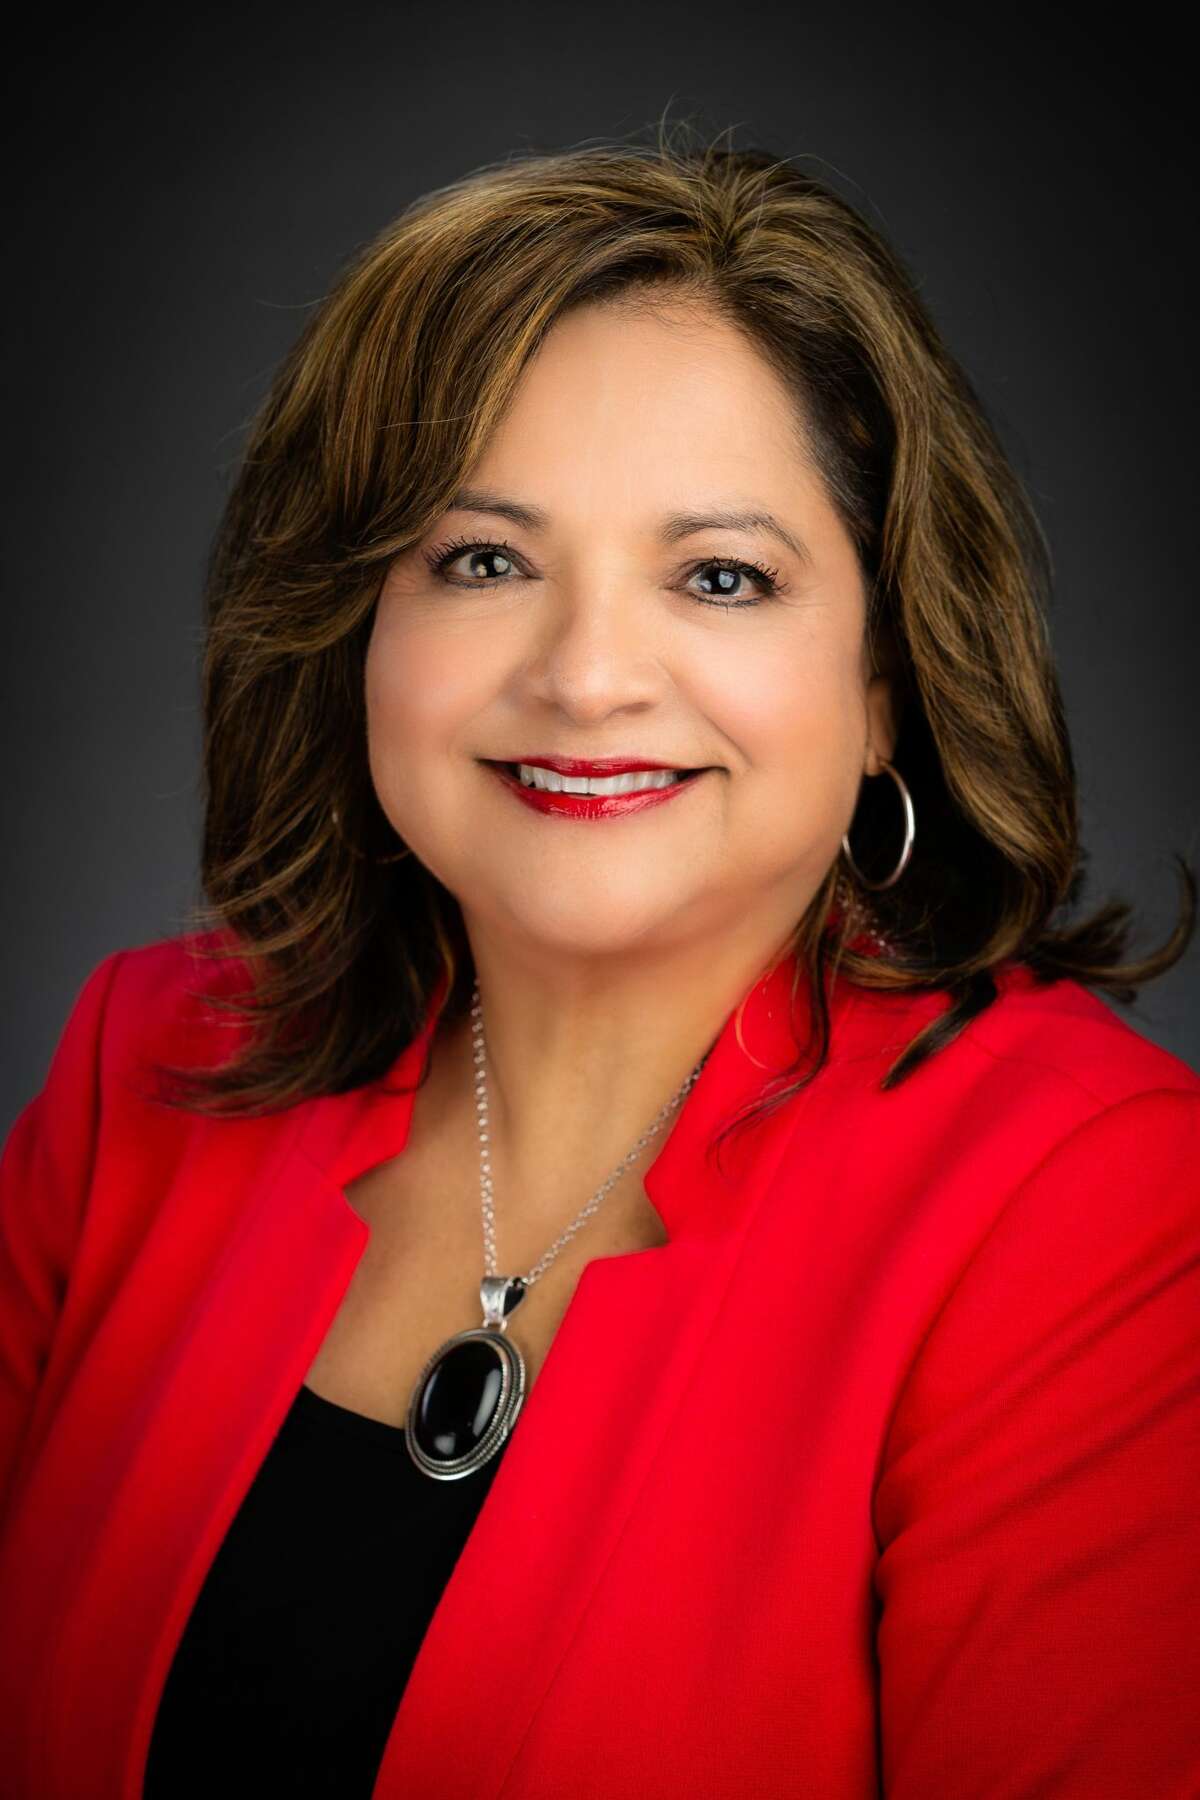 Adelina Silva: Education "Dr. Adelina Silva, is the Vice Chancellor for Student Success for the Alamo Colleges District.  Her visionary and innovative program and model development to provide assistance to all individuals who seek educational opportunities and guidance for a better life is remarkable.   She was nominated by Martha Tijerina and Patricia Parma." Source: San Antonio Women's Hall of Fame